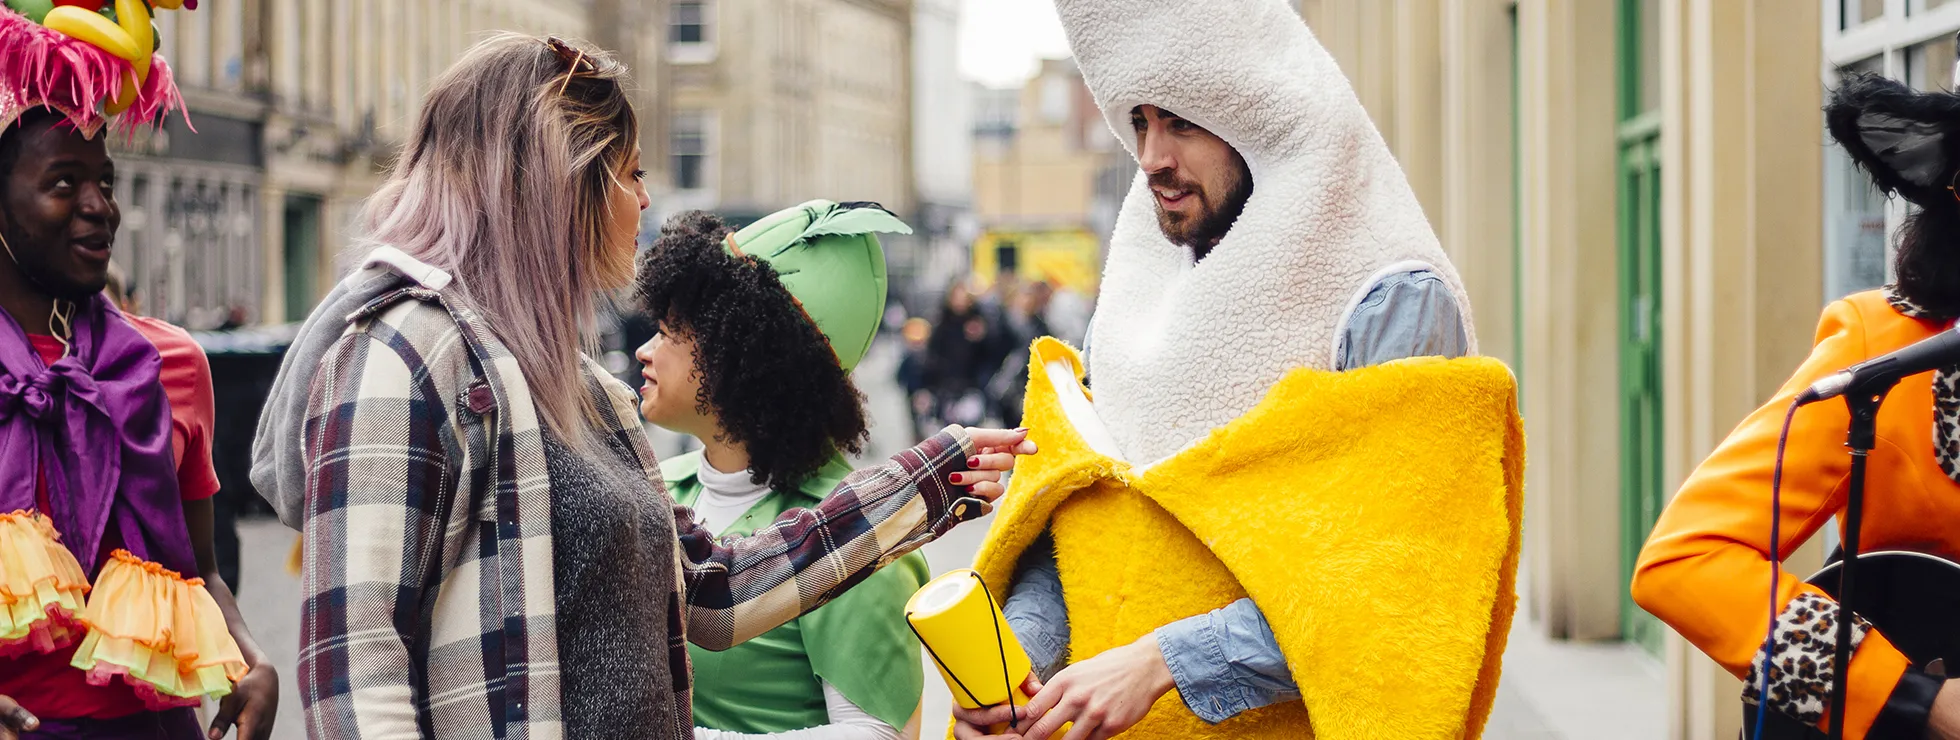 A guy dressed as a banana with a charity collecting tin, talking to other people in costumes at a local carnival event